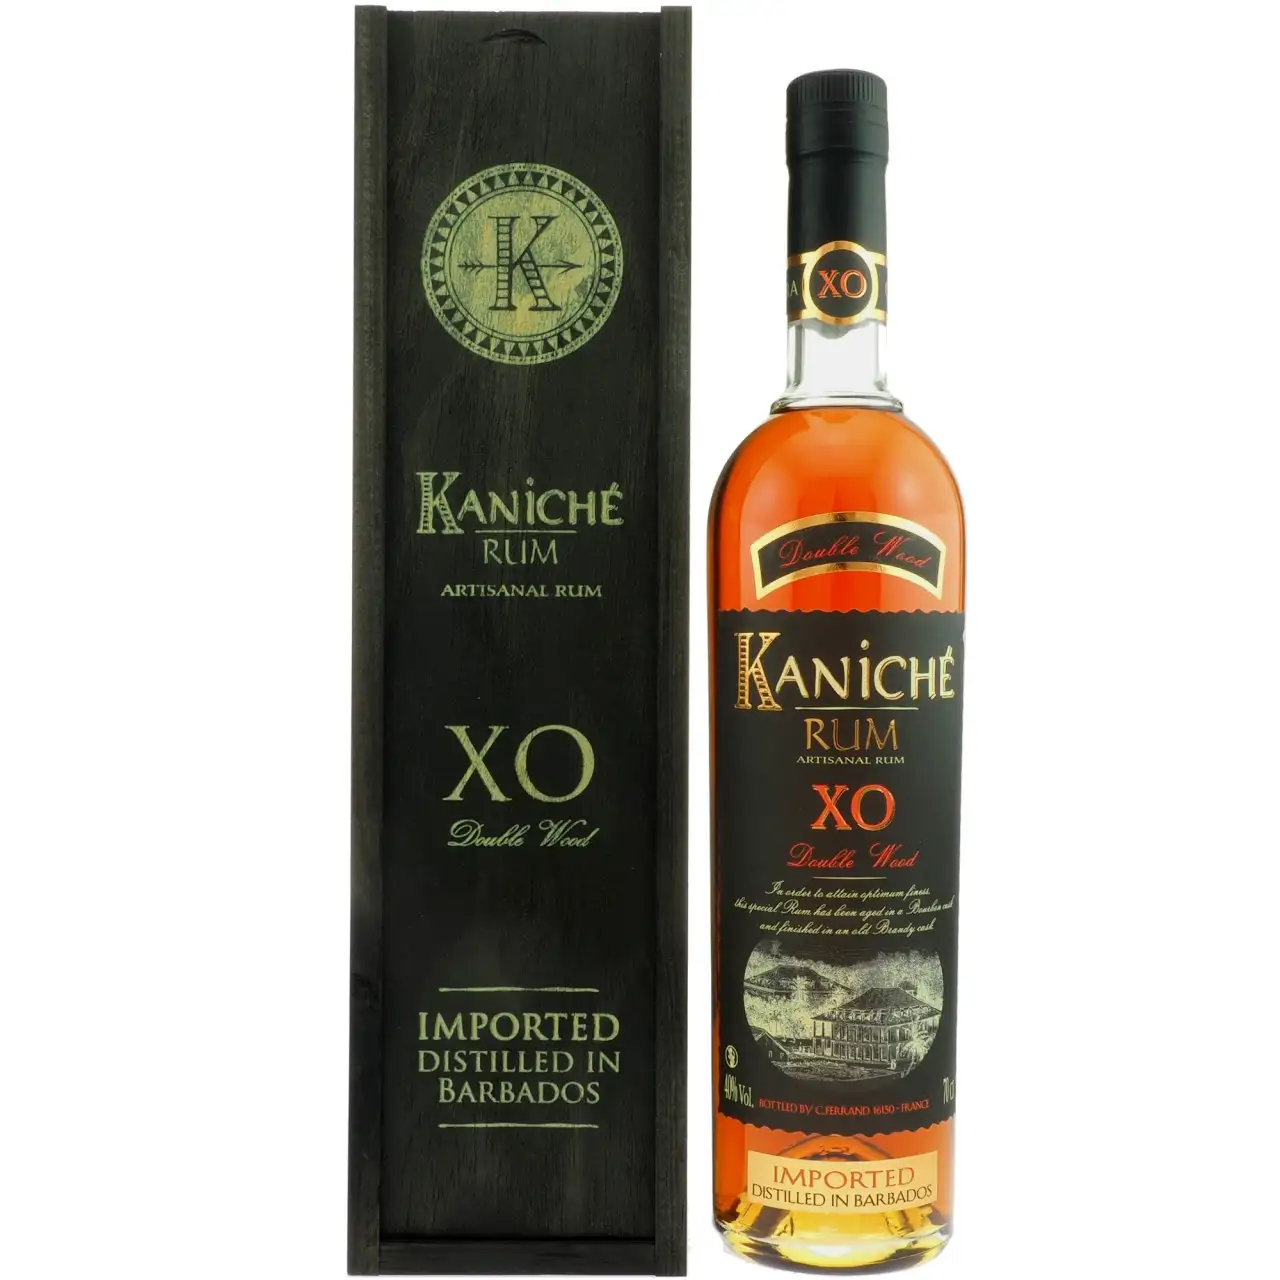 Image of the front of the bottle of the rum Kaniché Double Wood XO